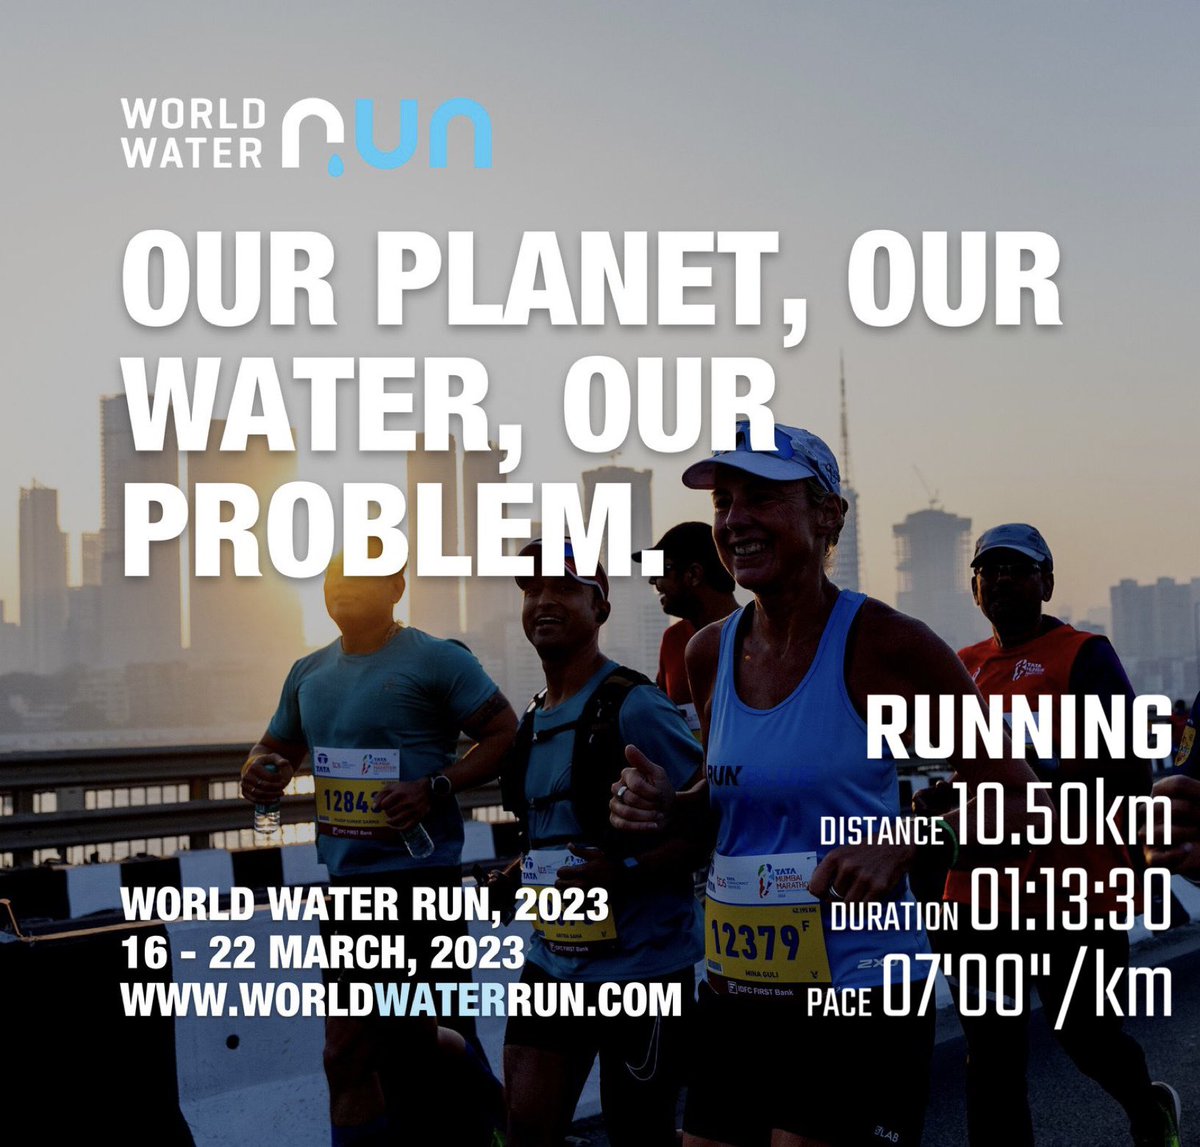 My run for #WorldWaterRun2023 with @MinaGuli. Watching a feature yesterday that said water will be the ‘oil of the next century’ - we must conserve & replenish before it becomes a scarce & premium priced product. Oil we can live without, water we cannot. #WorldWaterRun ✌️#Running